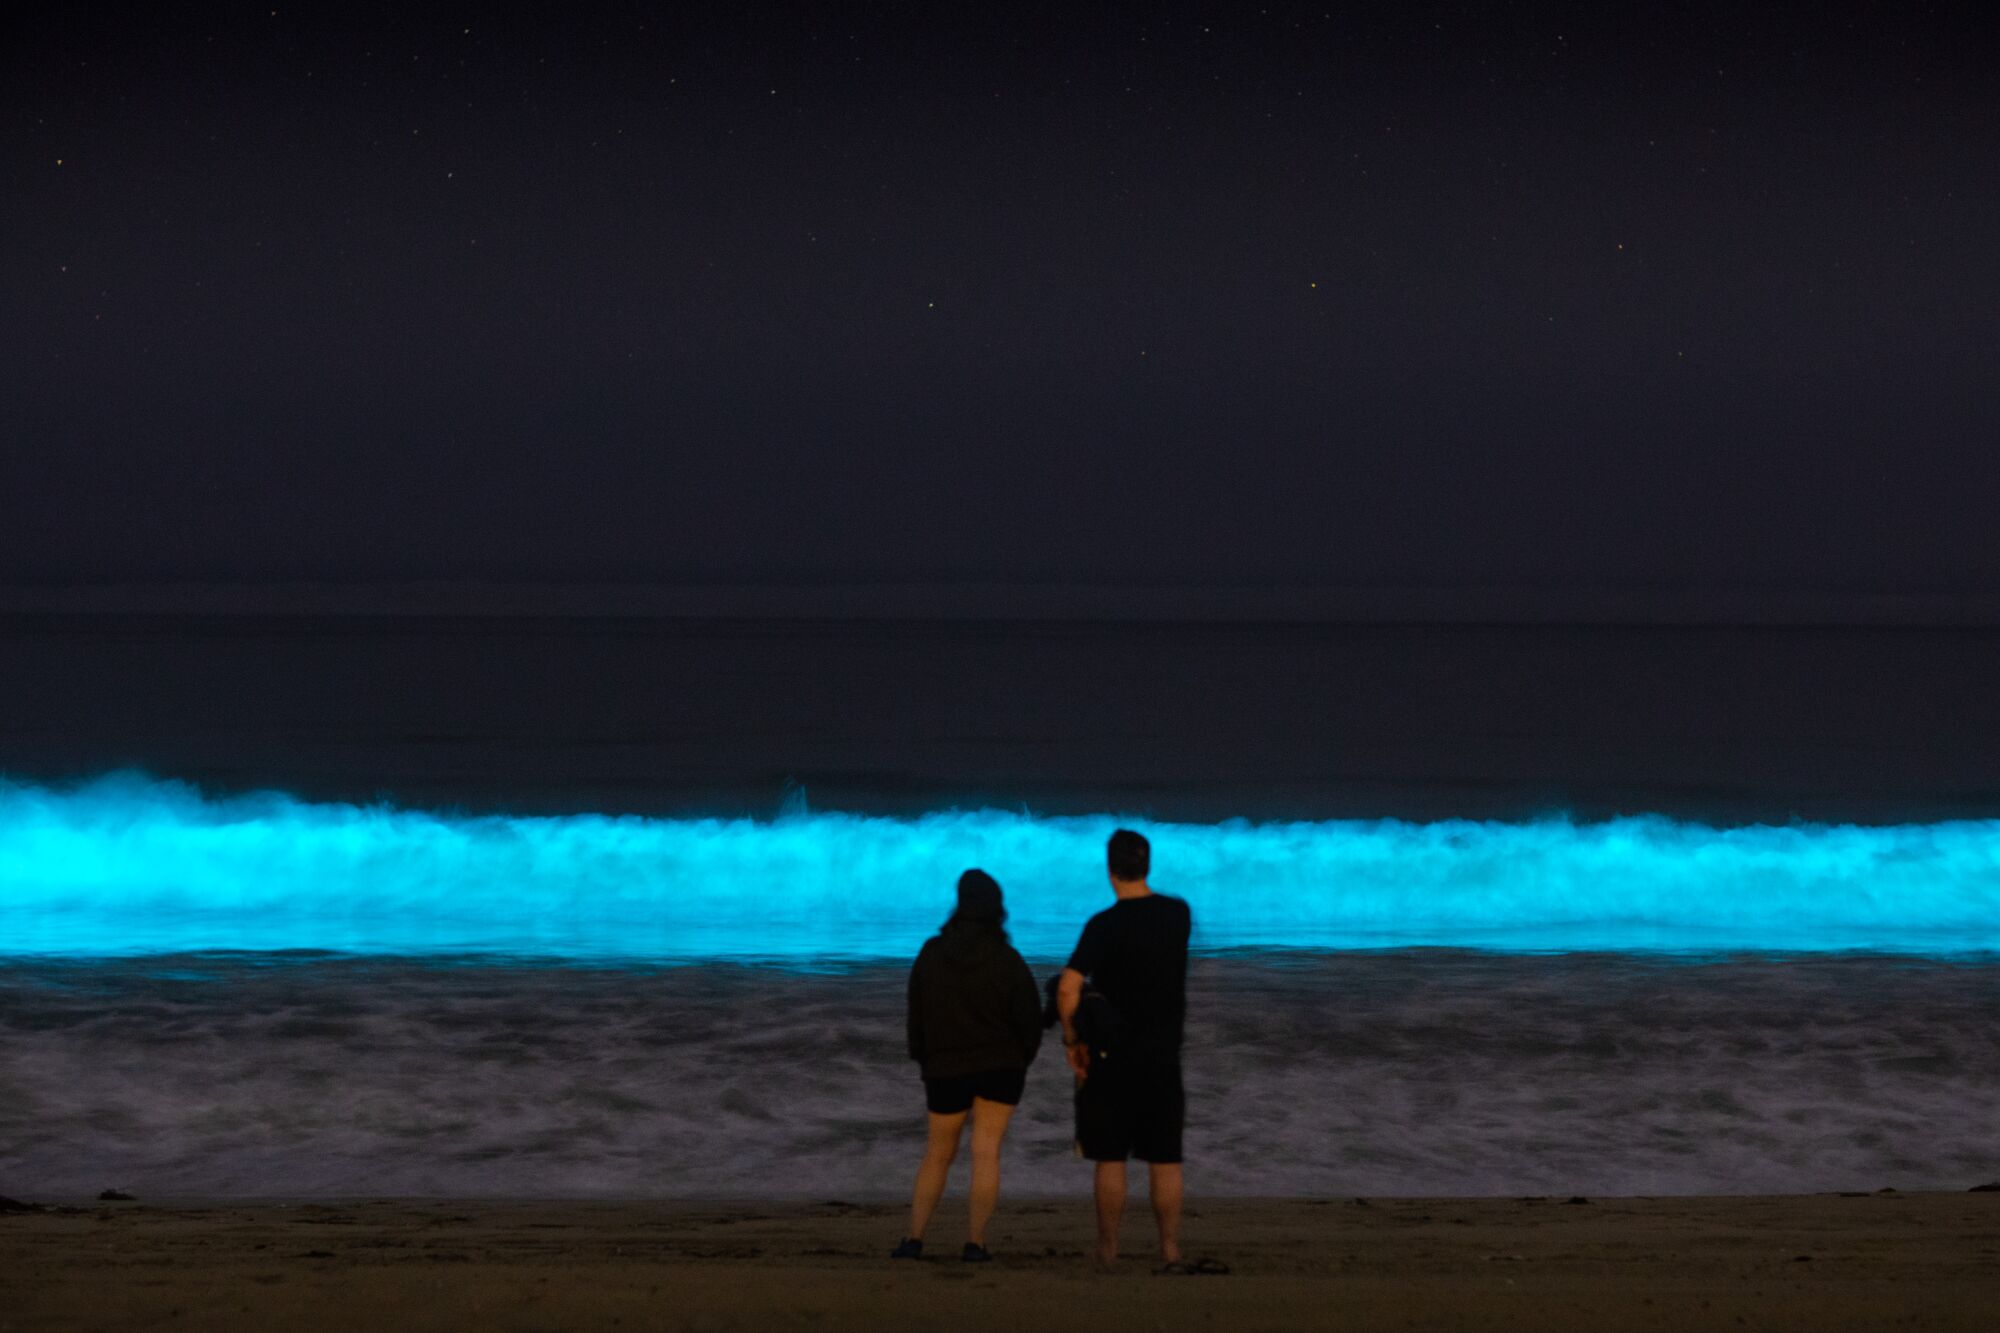 HERMOSA BEACH, CA - APRIL 25: Bioluminescent waves glow off the coast of Hermosa Beach, CA, Saturday, April 25, 2020. The phenomenon is associated with a red tide, or an algae bloom, filled with dinoflagellates which react with bioluminescence when jostled by the moving water. During the daytime, due to the pigmentation of the dinoflagellates, the water can turn a deep red, brown, or orange color, giving red tides their name.(Jay L. Clendenin / Los Angeles Times)